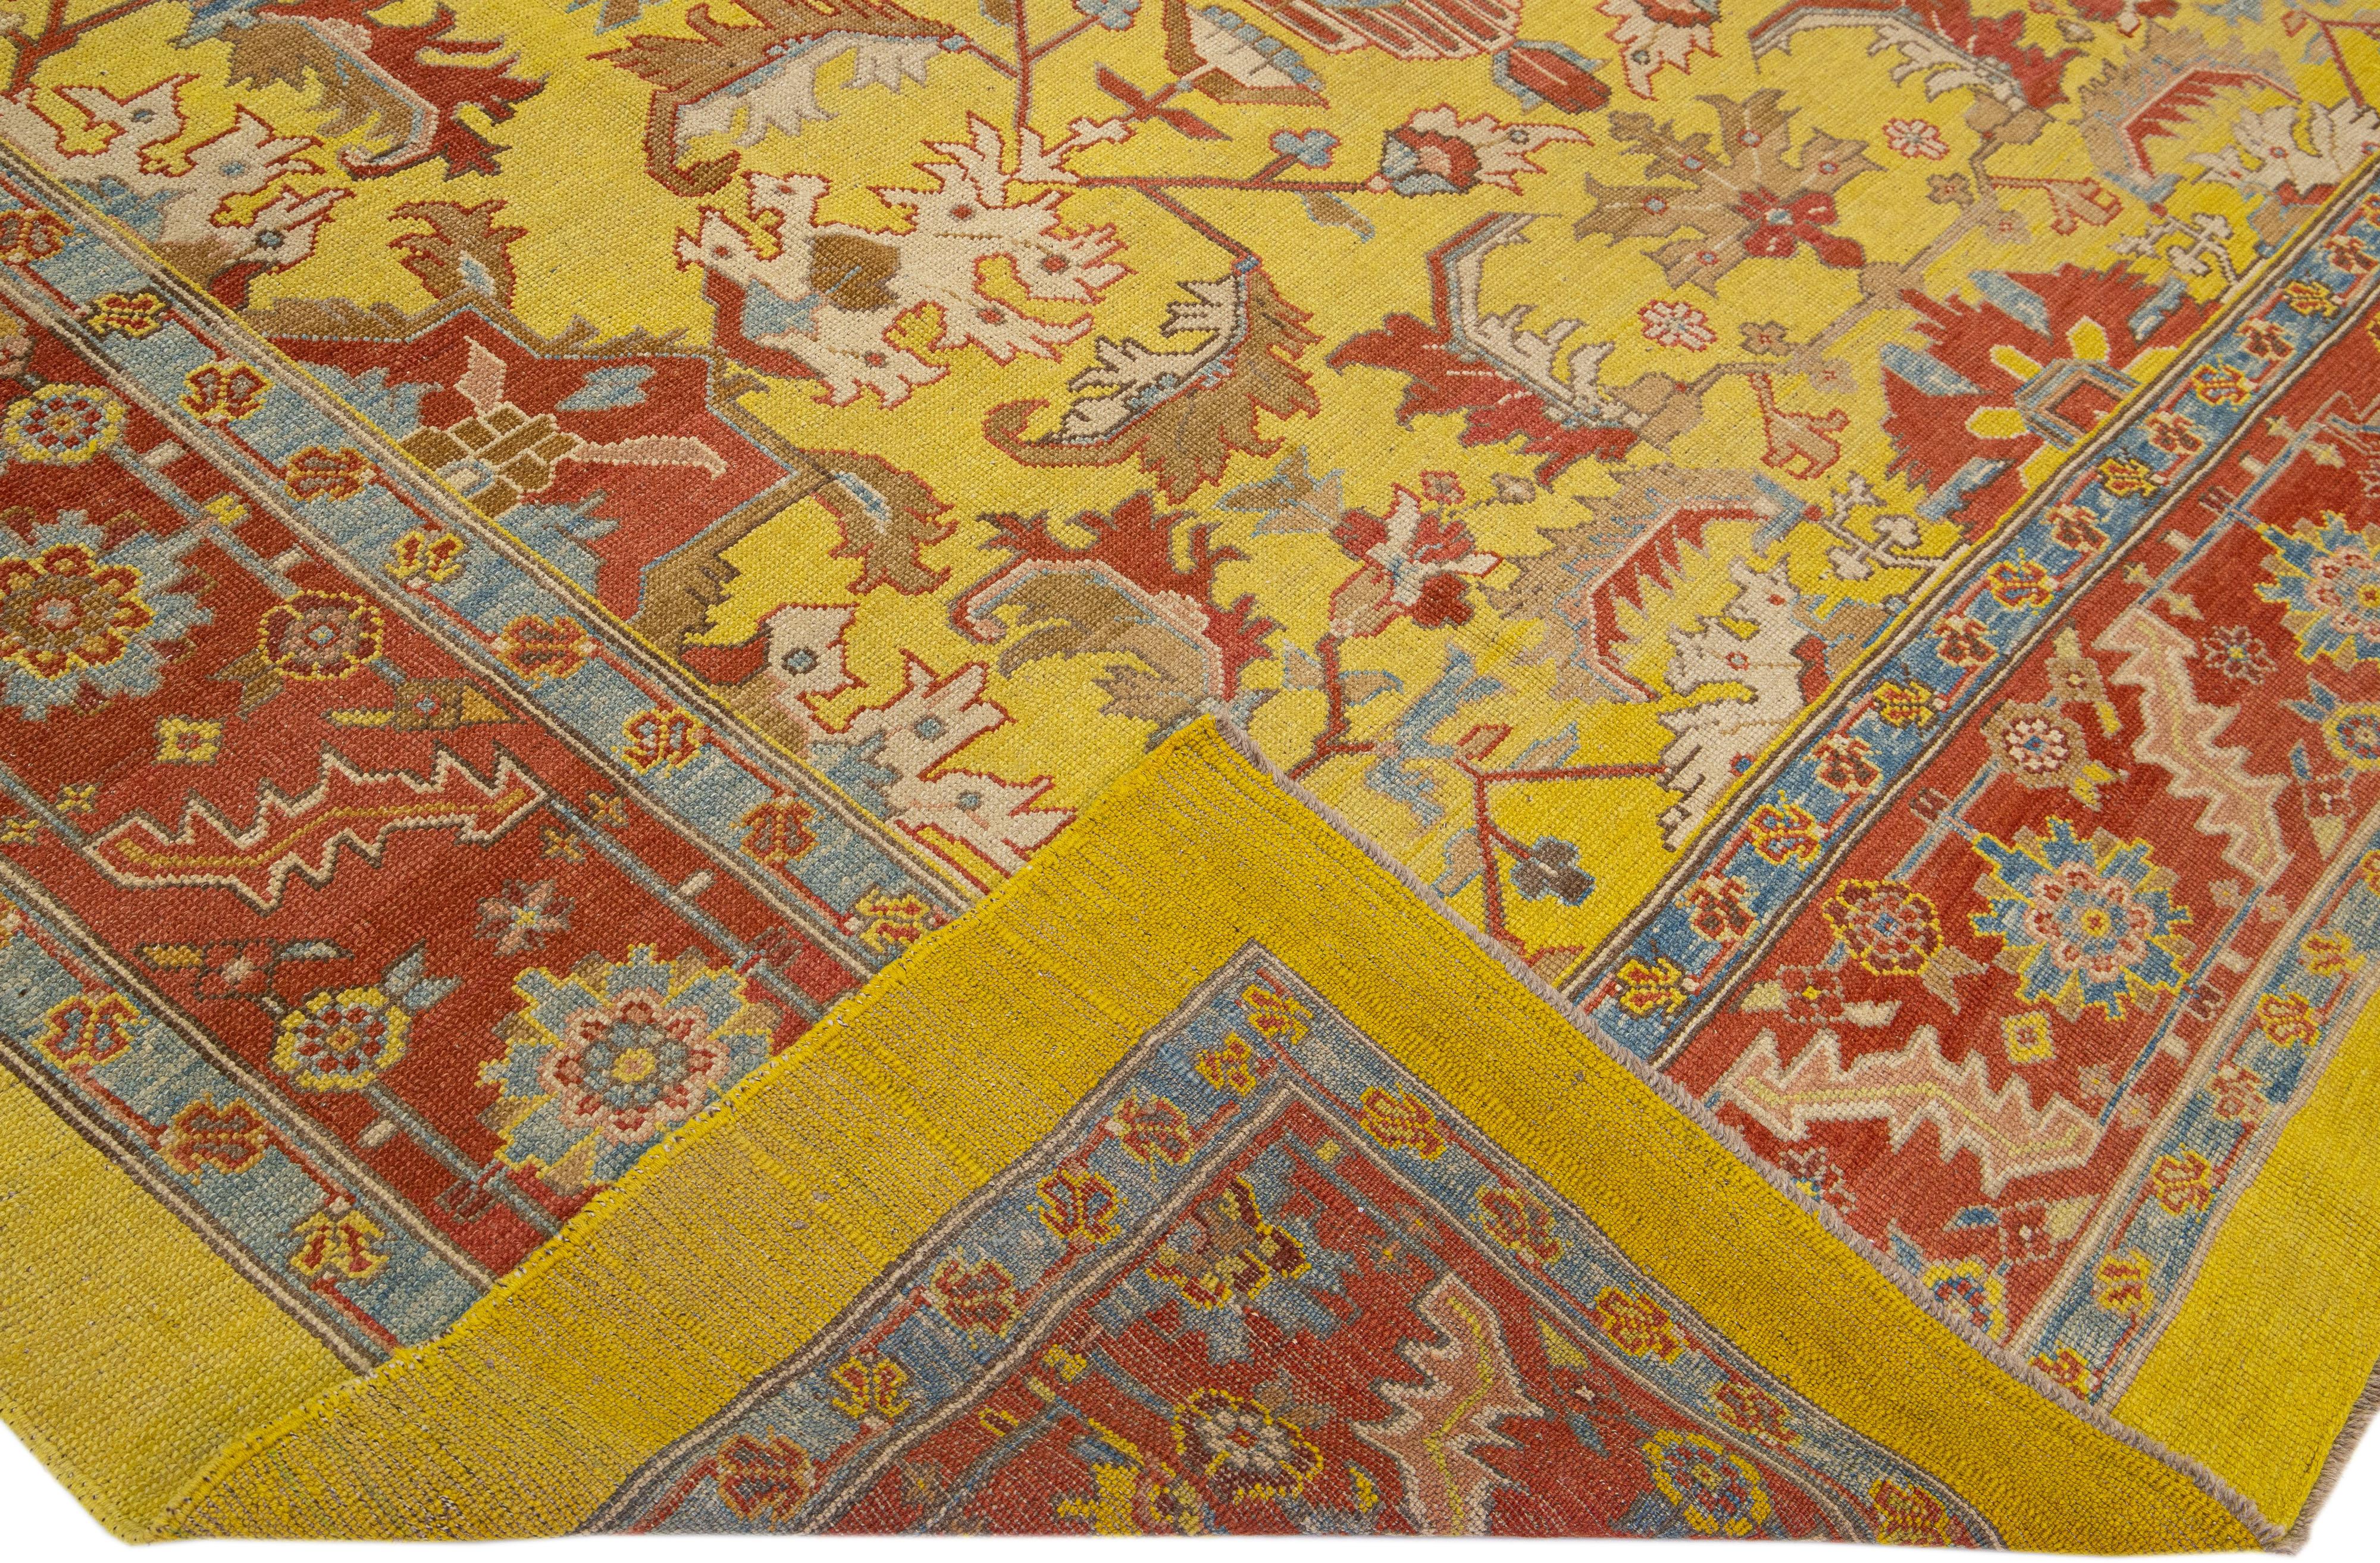 Beautiful vintage Bakshaish hand-knotted wool rug with a yellow field. This rug has a red- rust designed frame with accents of blue and brown in an all-over geometric tribal design.

This rug measures 10' 6